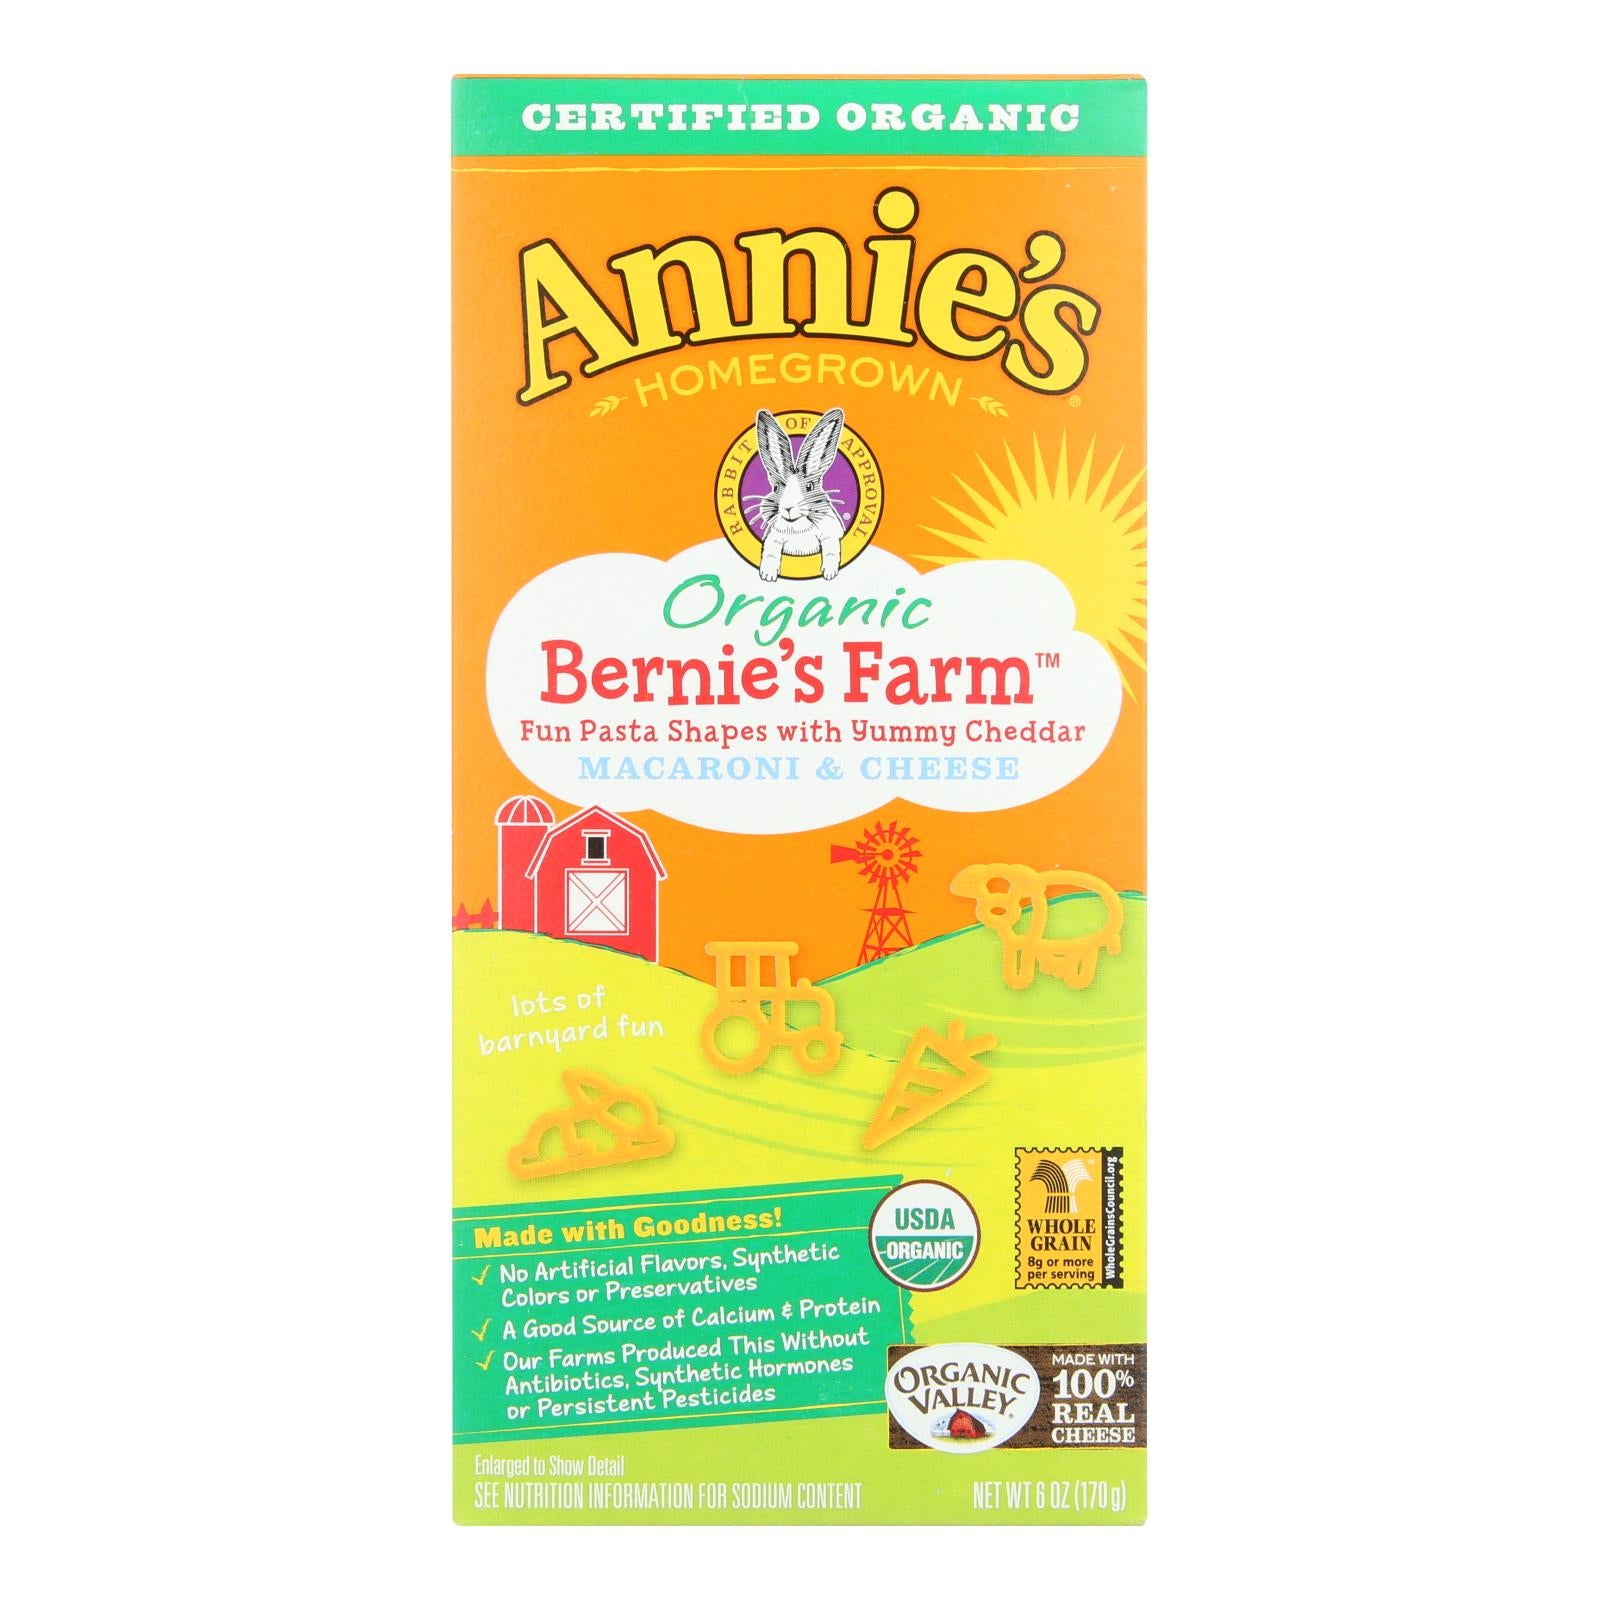 Annie'S Homegrown, Annie's Homegrown Bernie's Farm Macaroni and Cheese Shapes - Case of 12 - 6 oz. (Pack of 12)